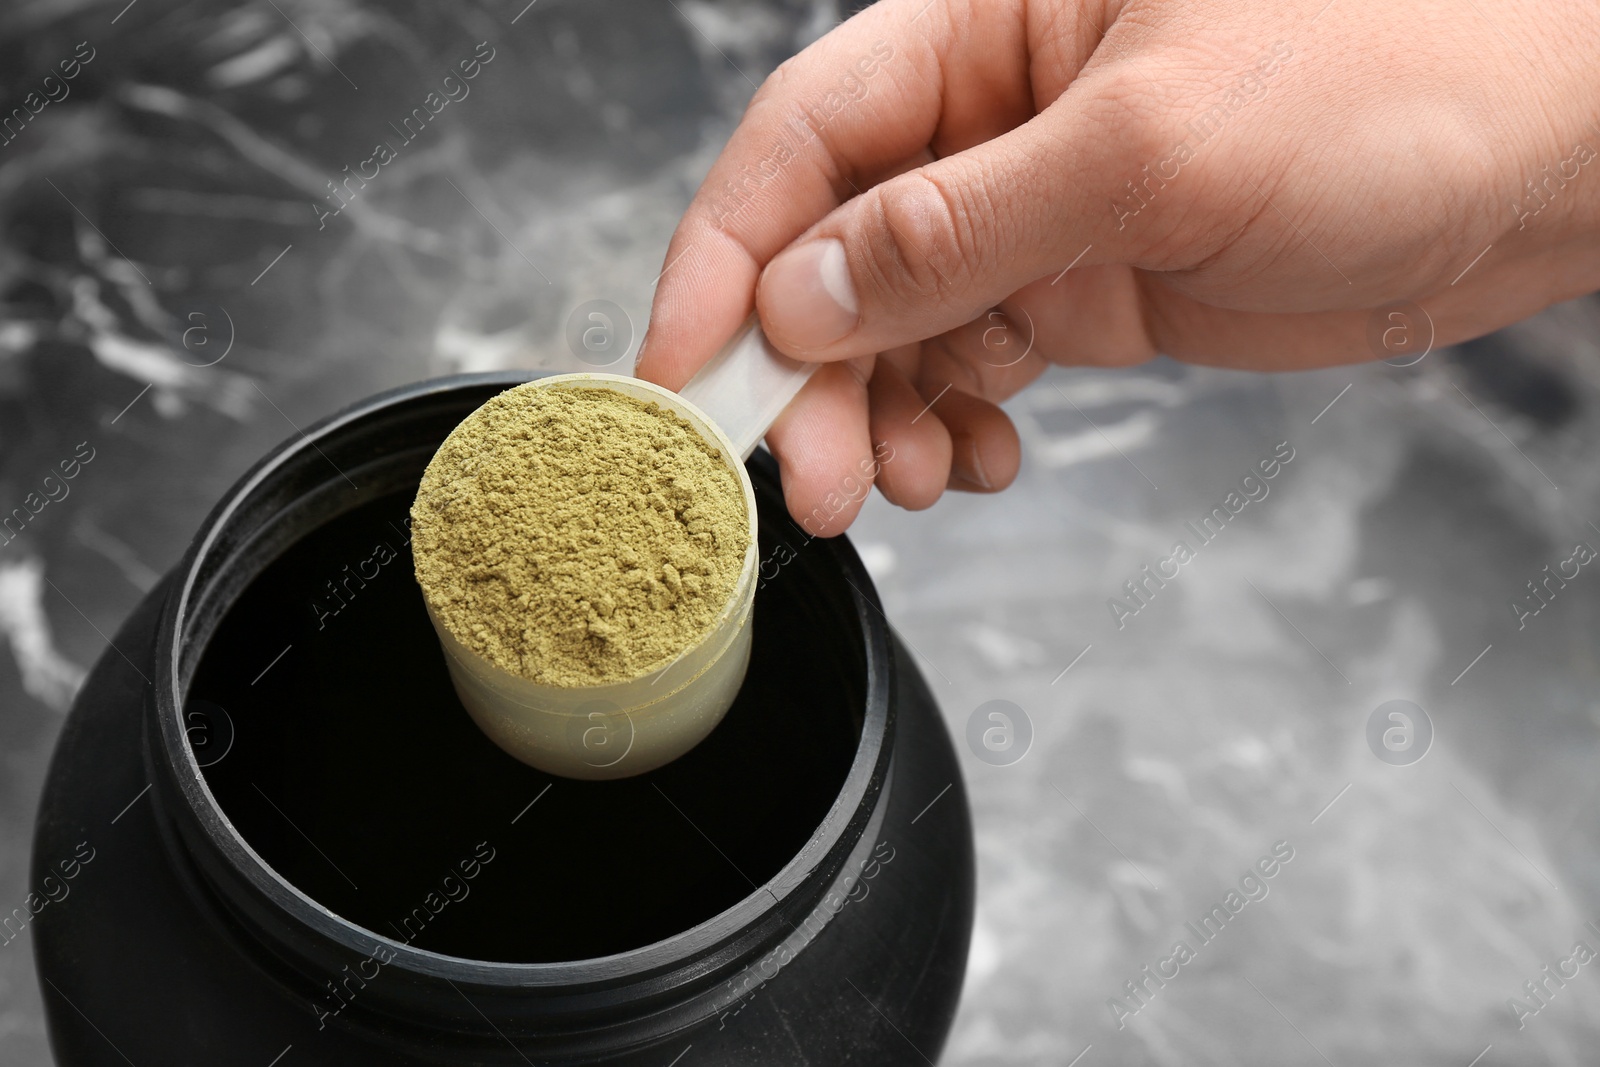 Photo of Man holding measuring spoon with hemp protein powder over jar on table